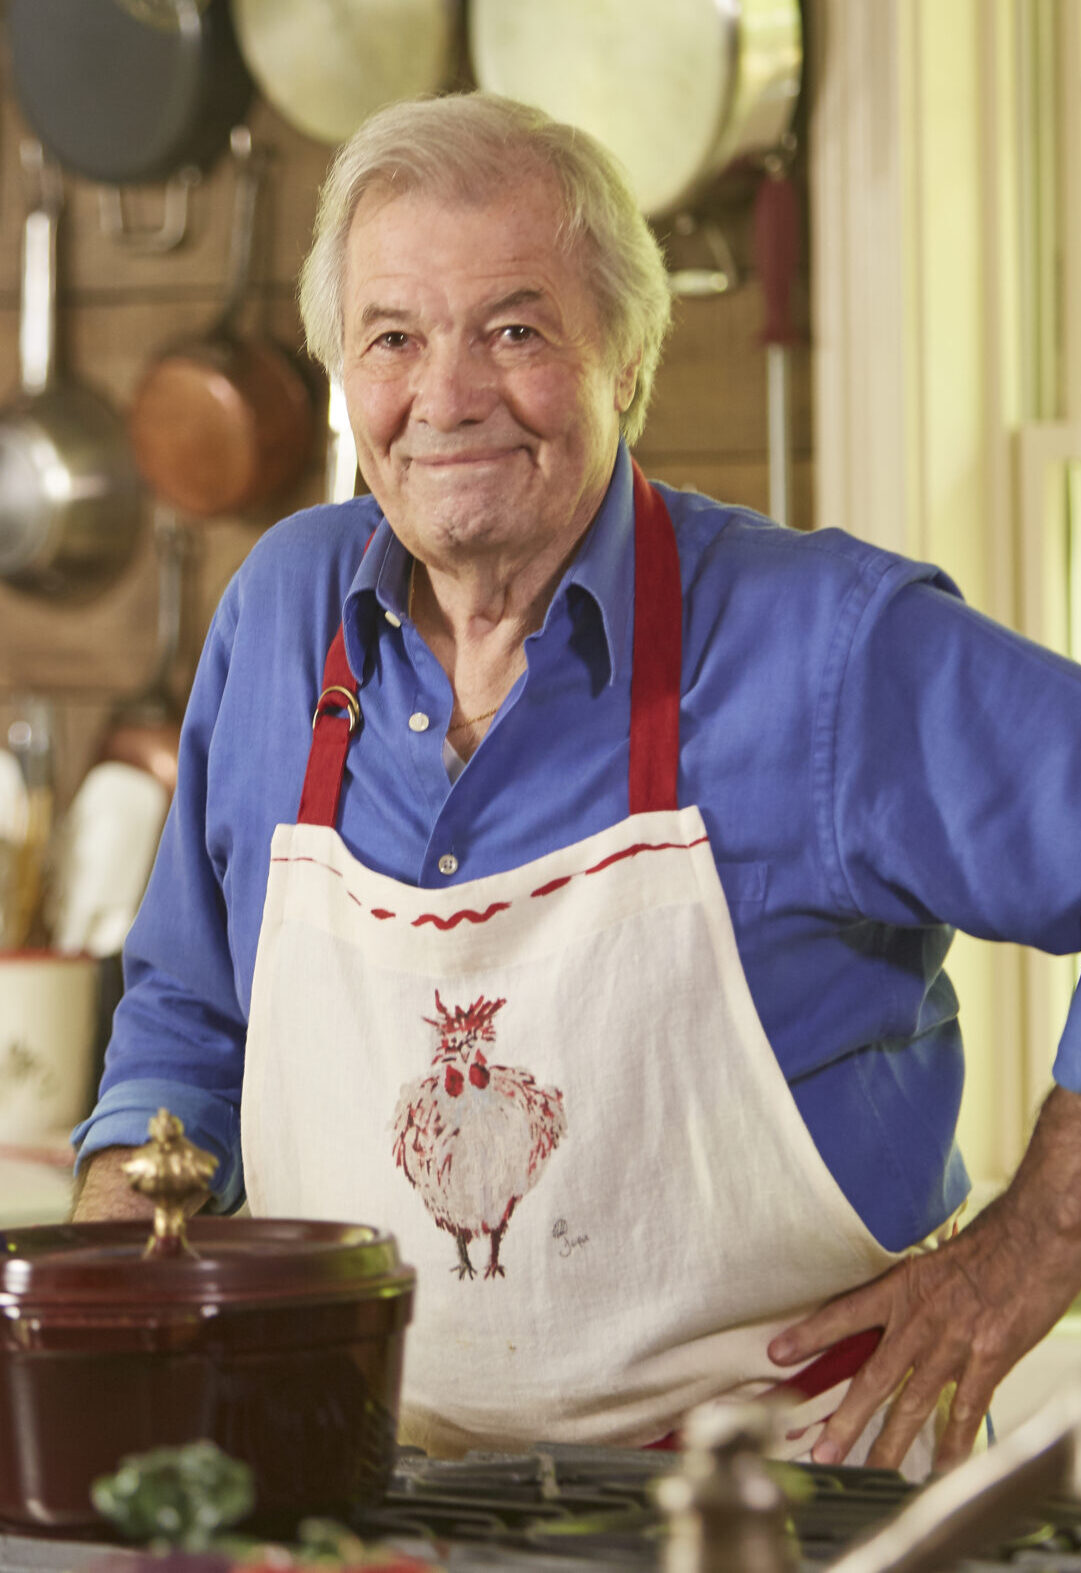 Jacques Pépin - Full Interview